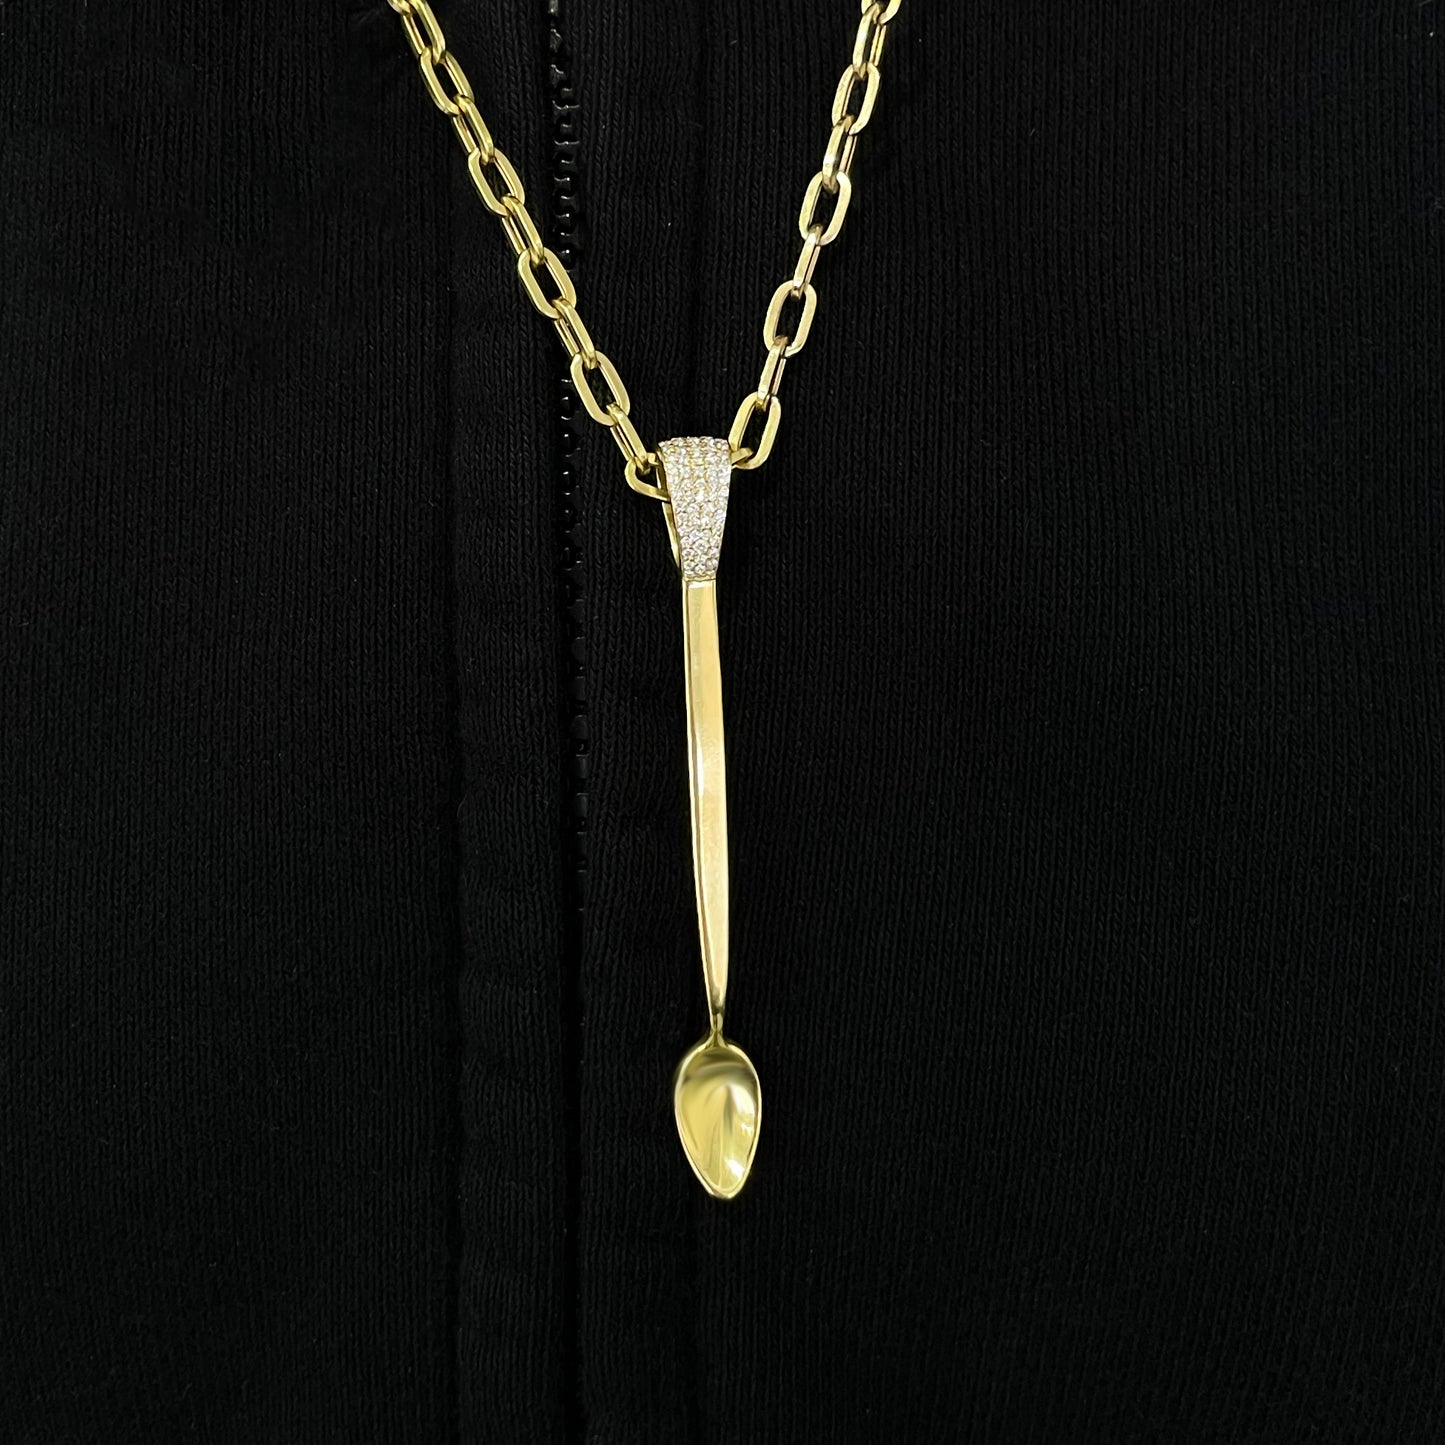 Solid Gold Spoon Pendant